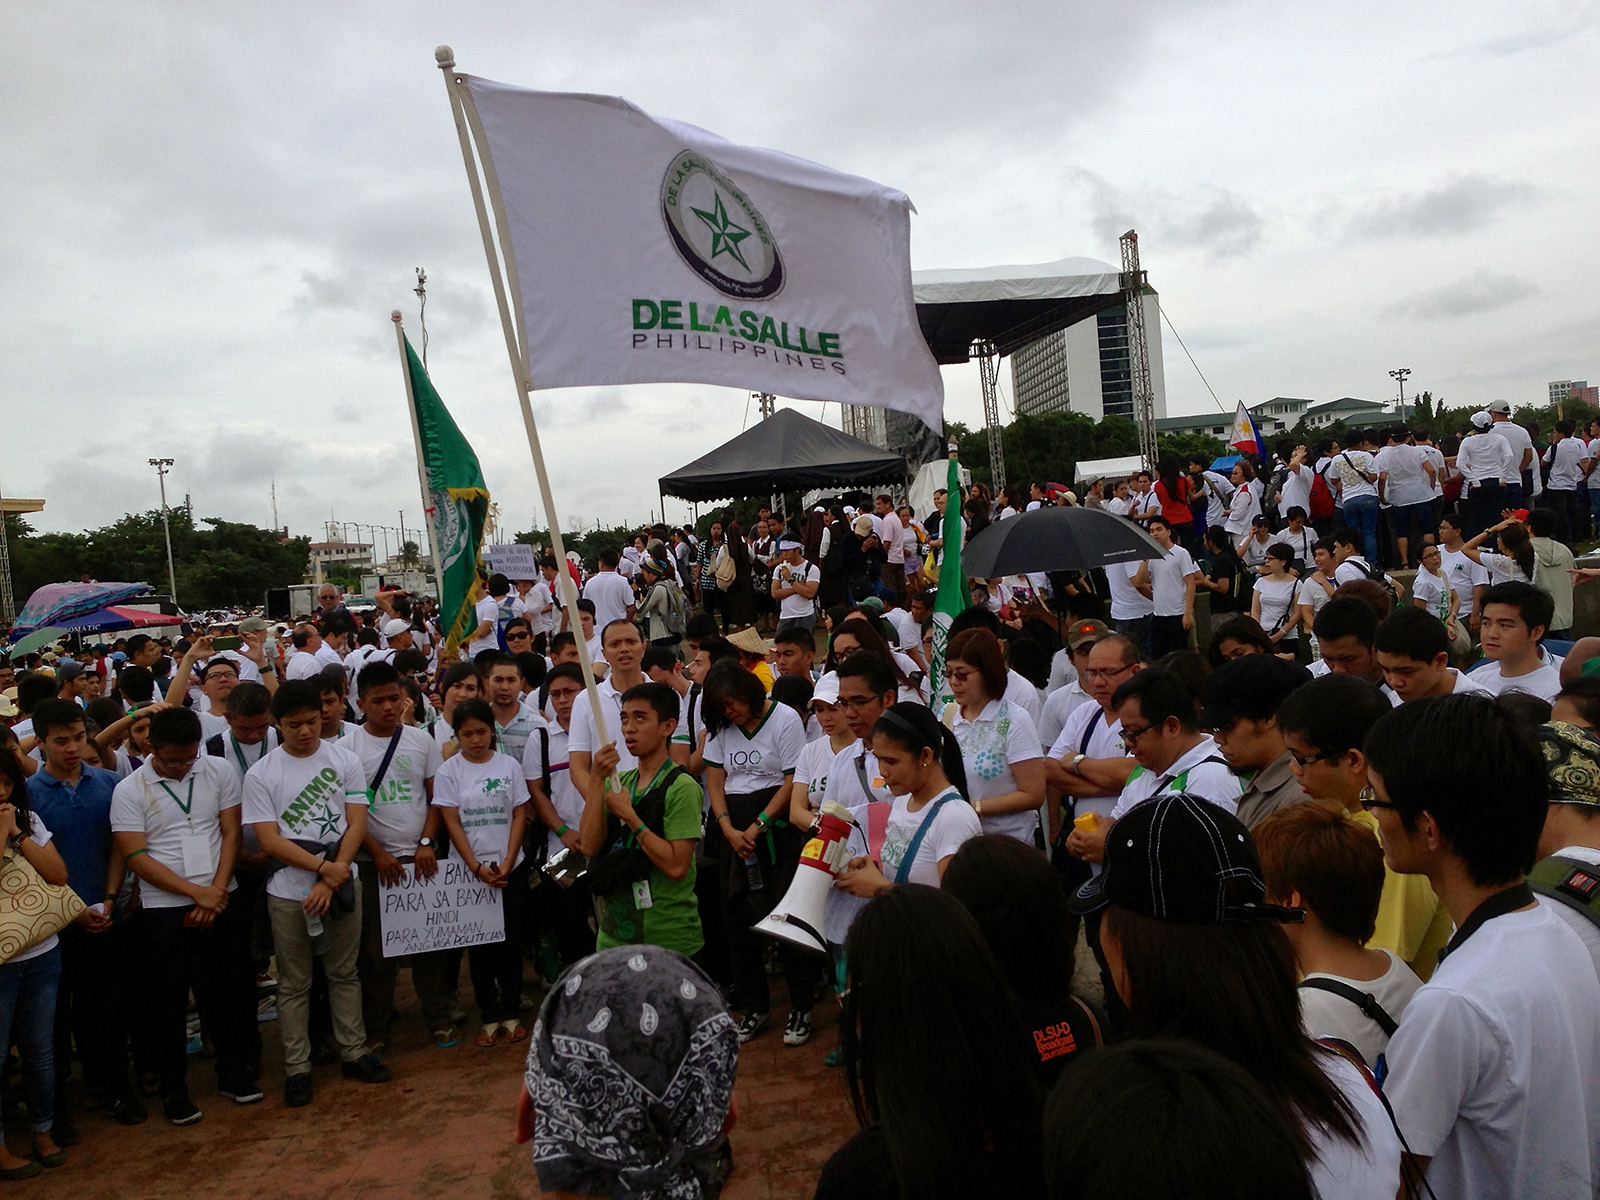  Lasallians from all over Luzon gathered in Rizal Park in unity with other Filipinos to express disgust towards the blatant misuse and abuse of public funds. 